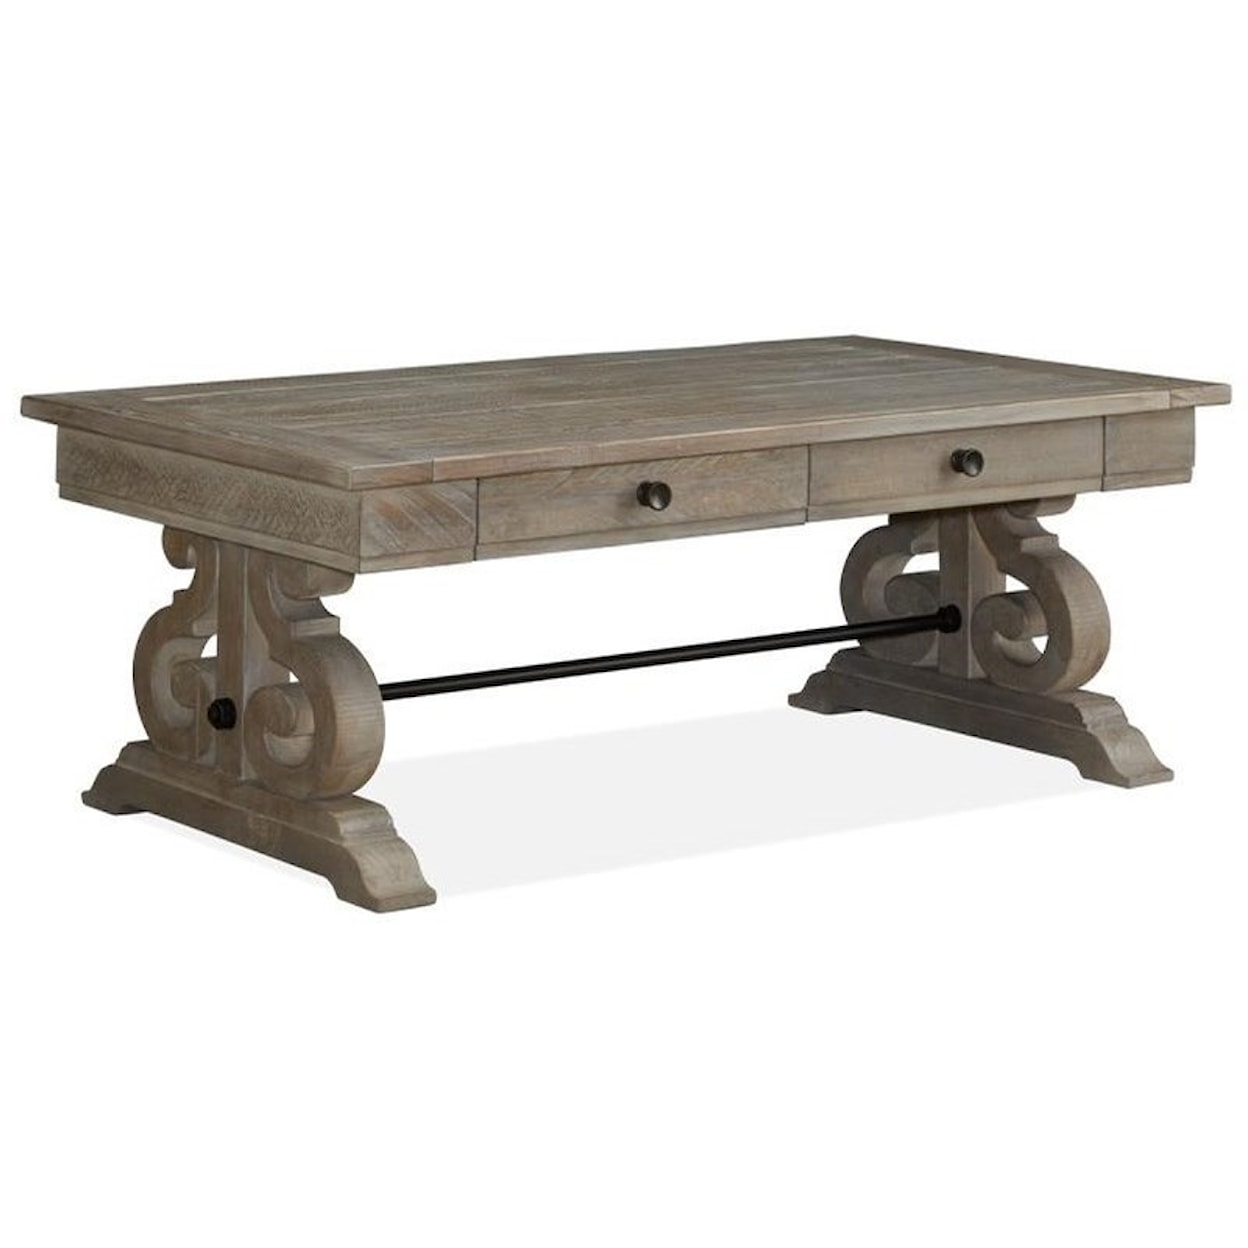 Magnussen Home Tinley Park Occasional Tables Rectangular Cocktail Table